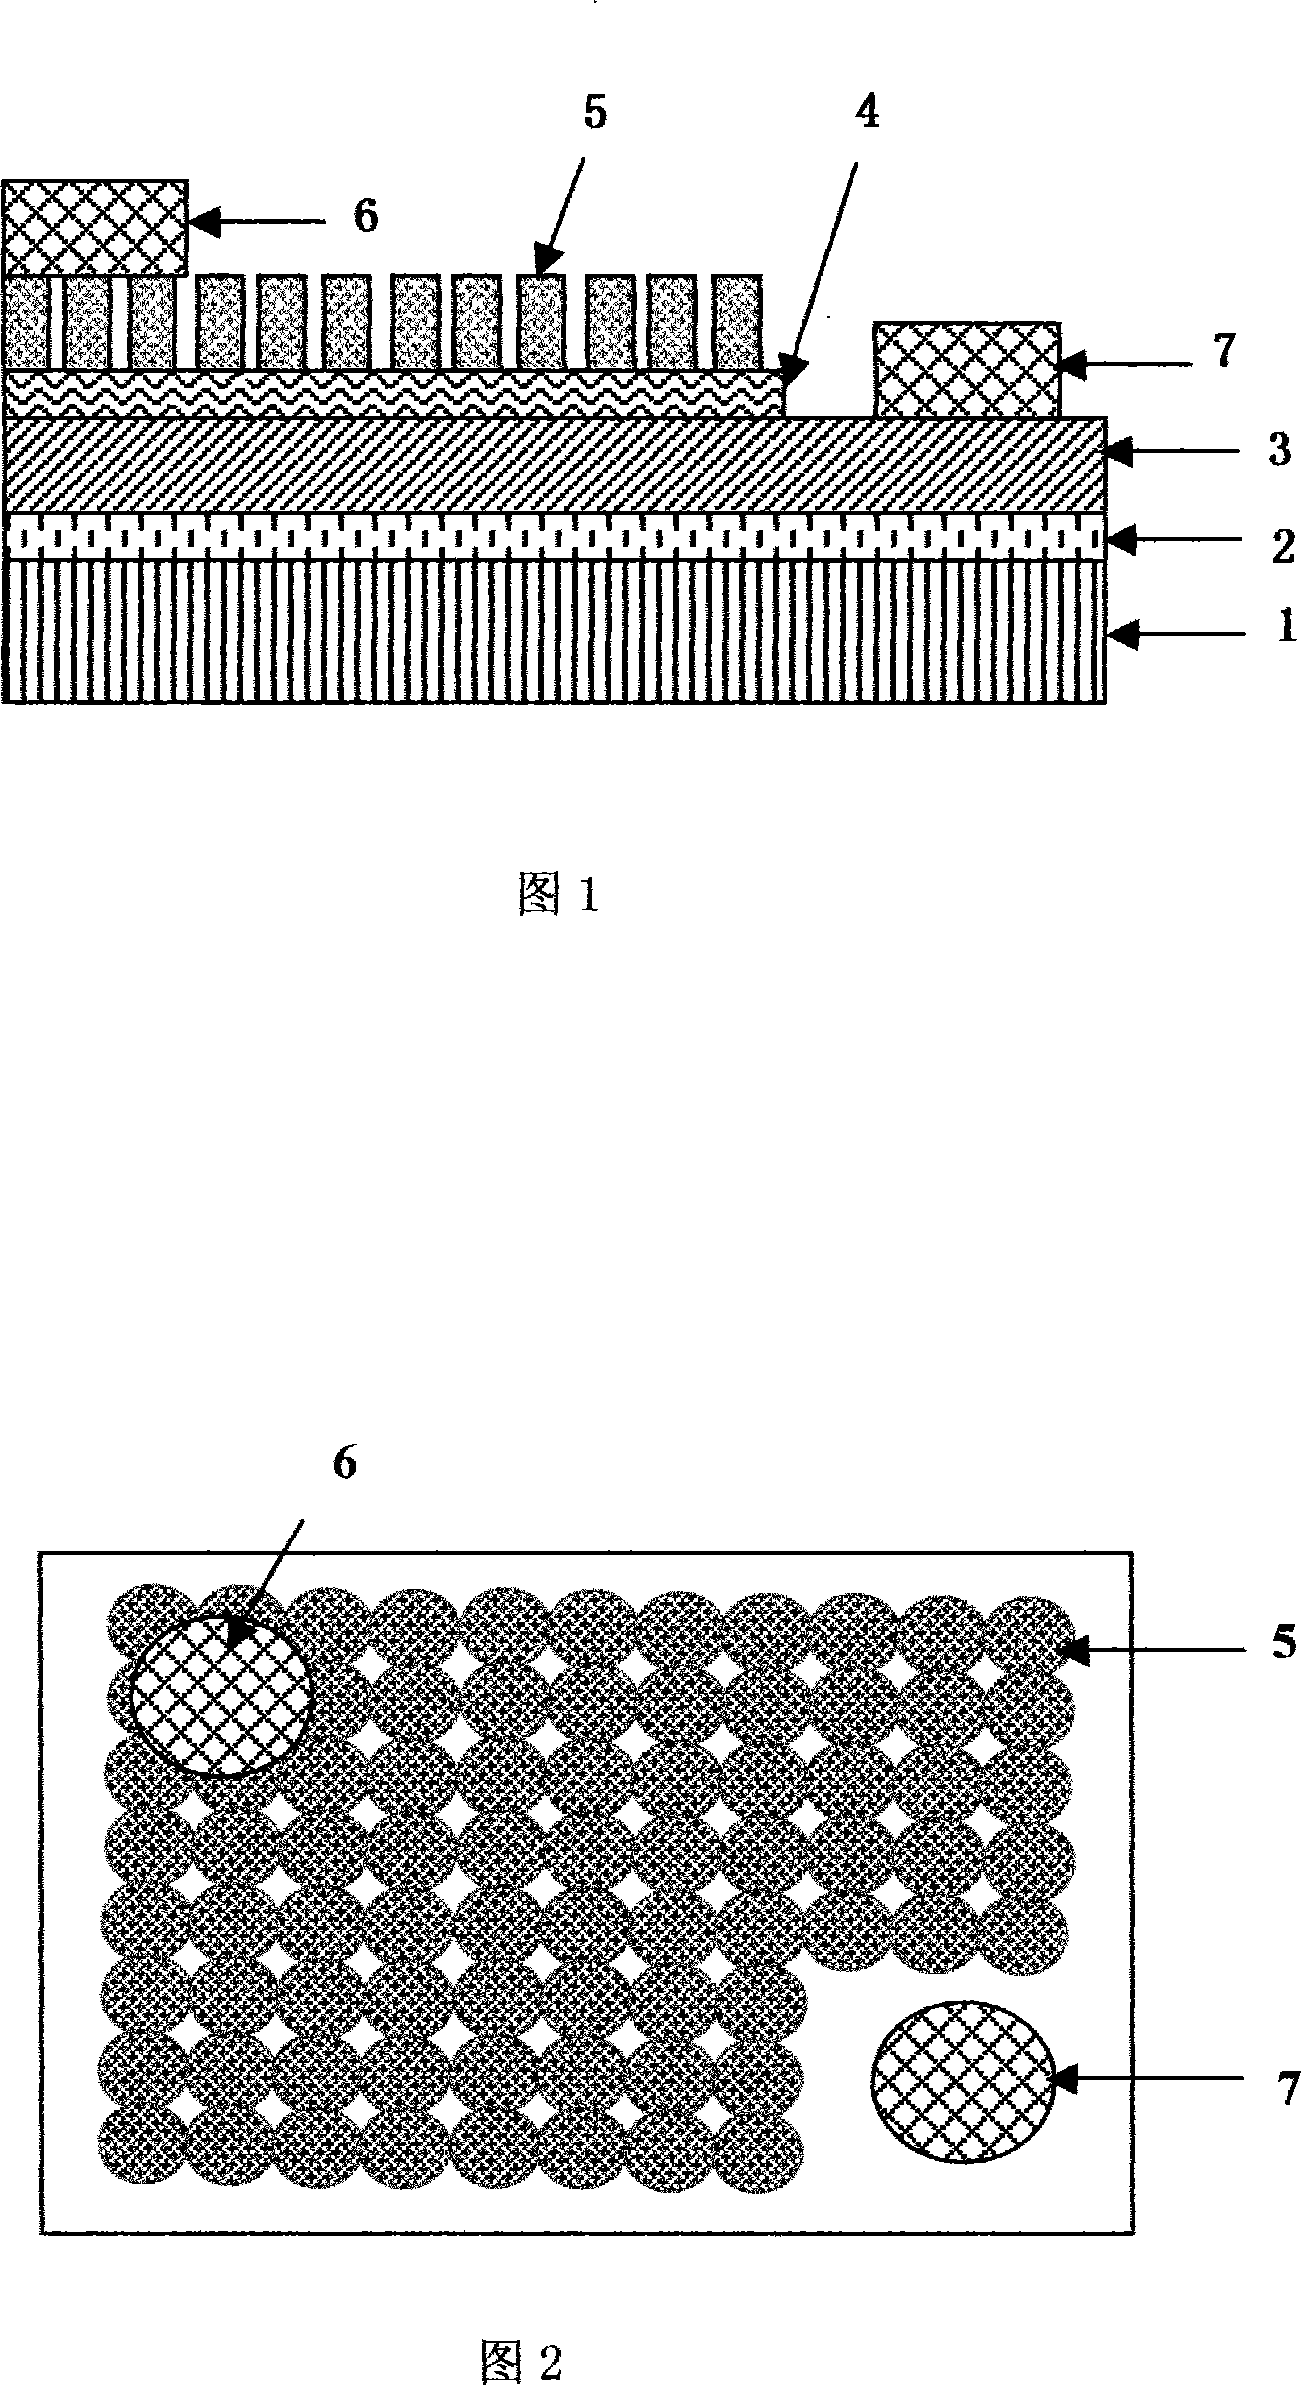 High efficiency light emitting diode with surface mini column array structure using diffraction effect